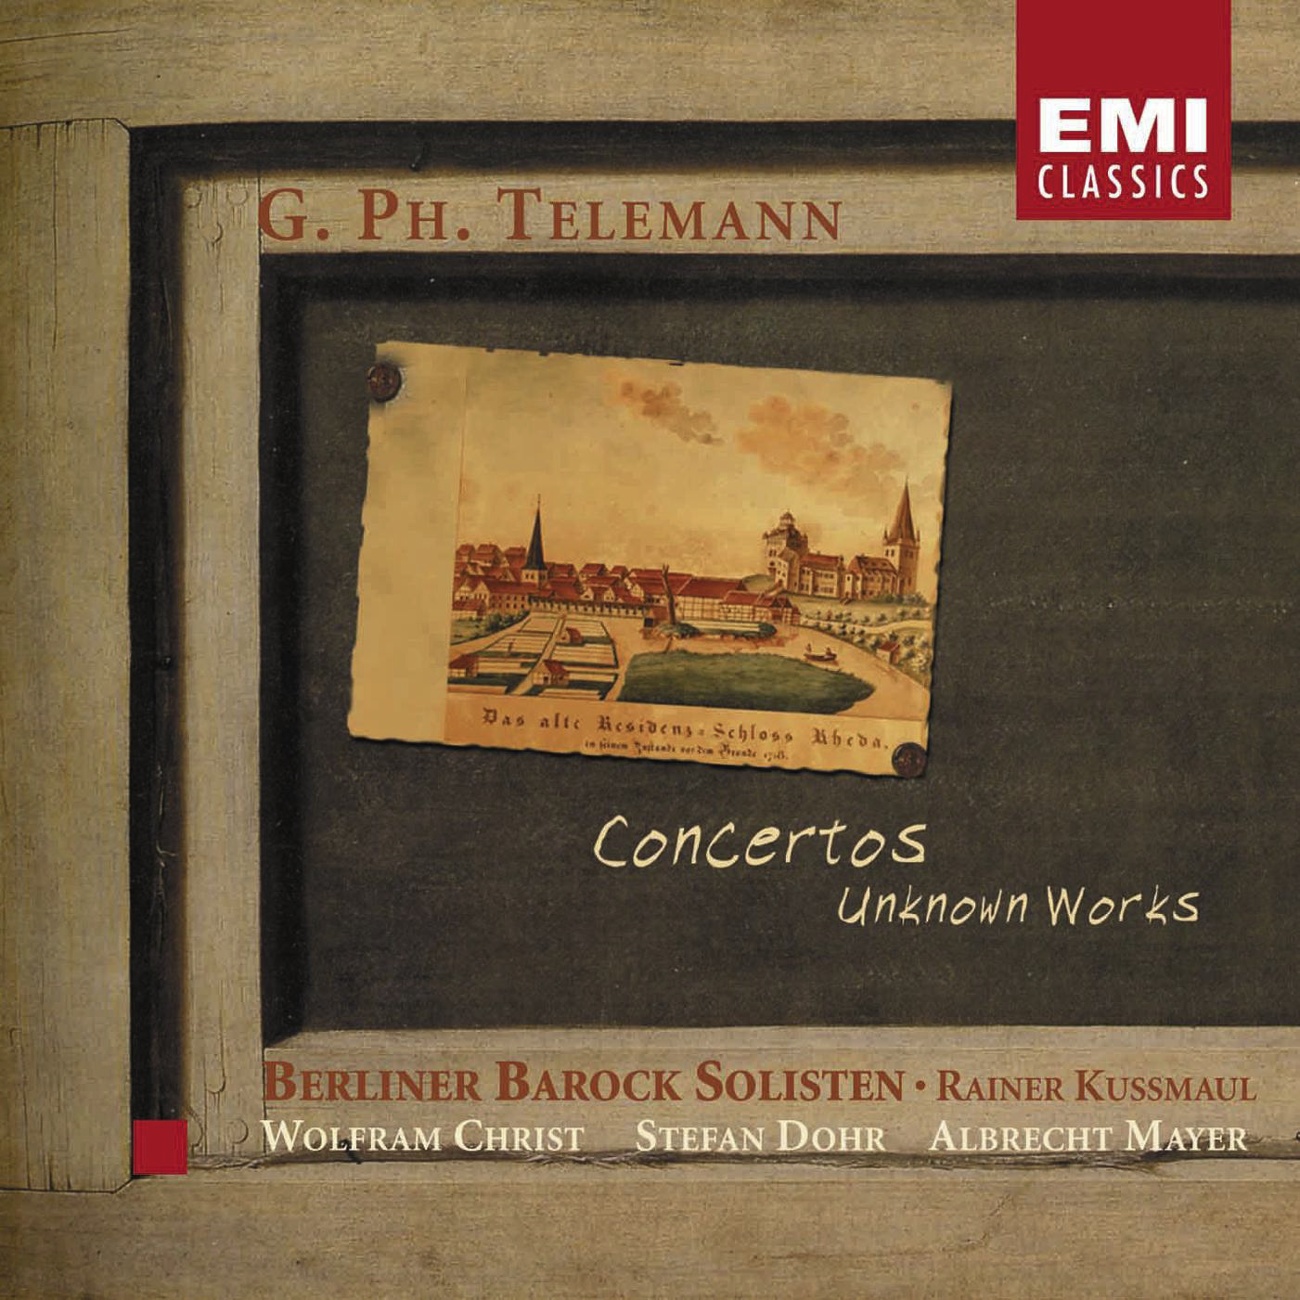 Concerto for Viola, Strings and basso continuo in G: allegro